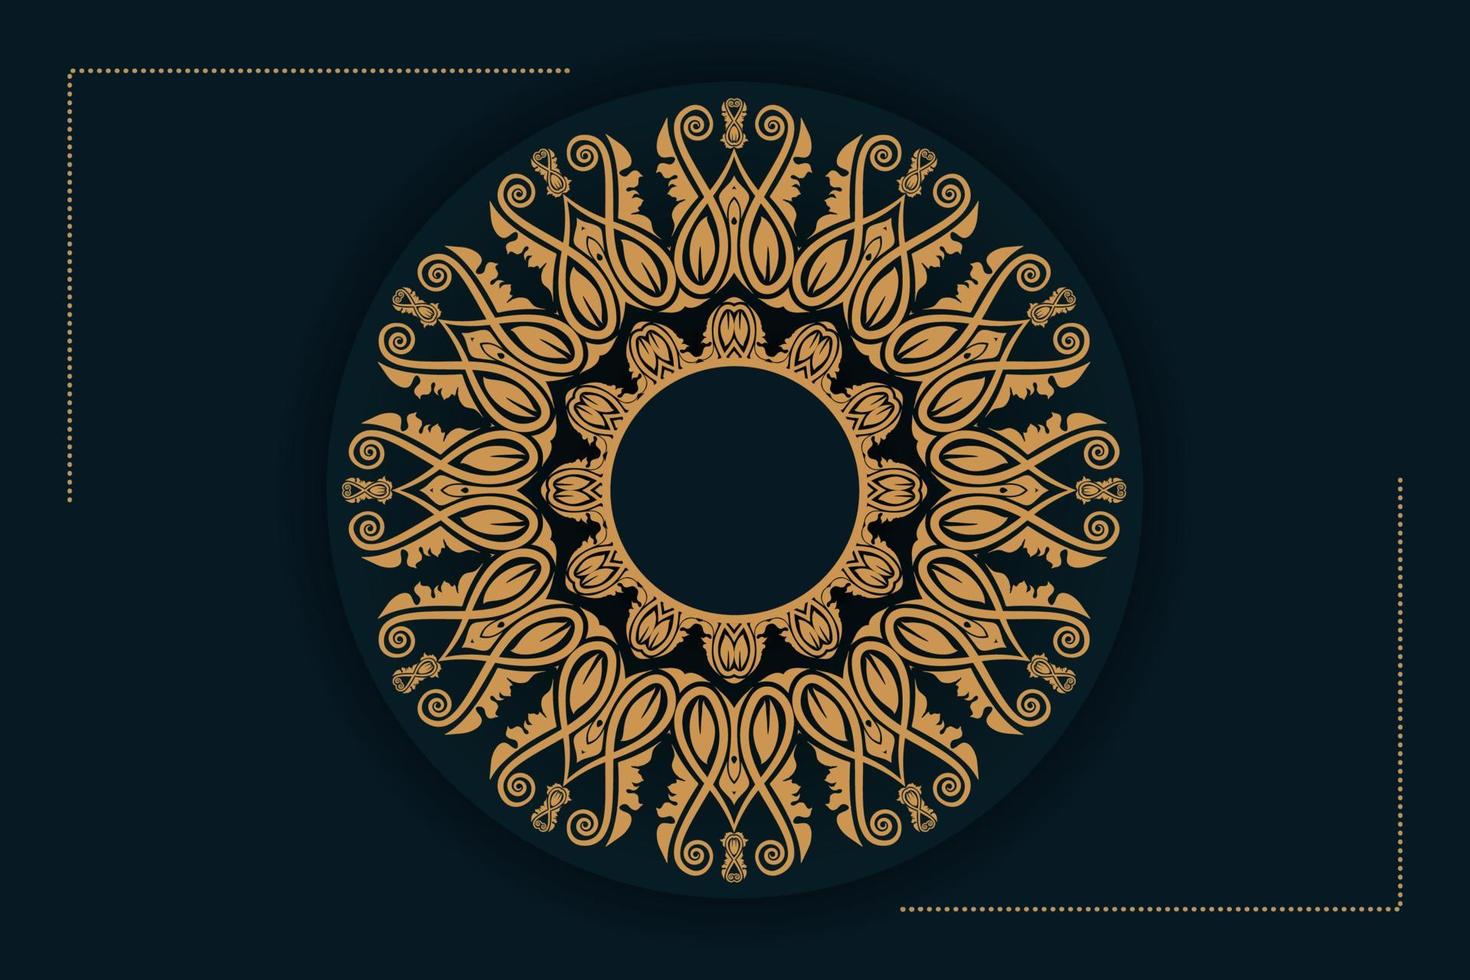 Luxury mandala background design with golden color pattern. Ornamental mandala template for decoration, wedding cards, invitation cards, cover, banner vector